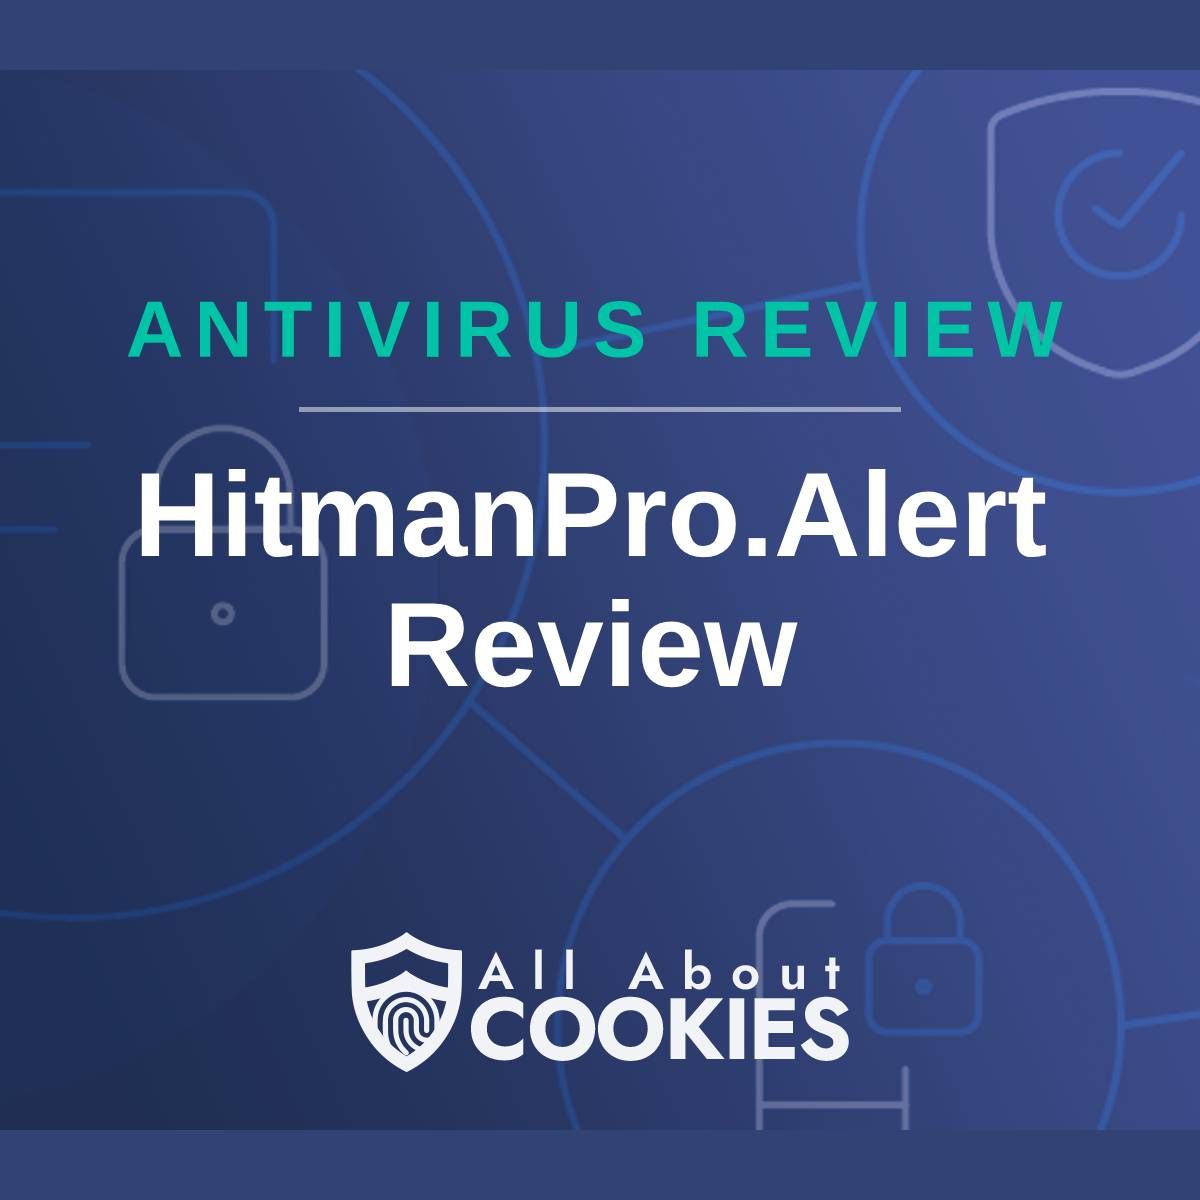 A blue background with images of locks and shields with the text &quot;Antivirus Review HitmanPro.Alert  Review&quot; and the All About Cookies logo. 